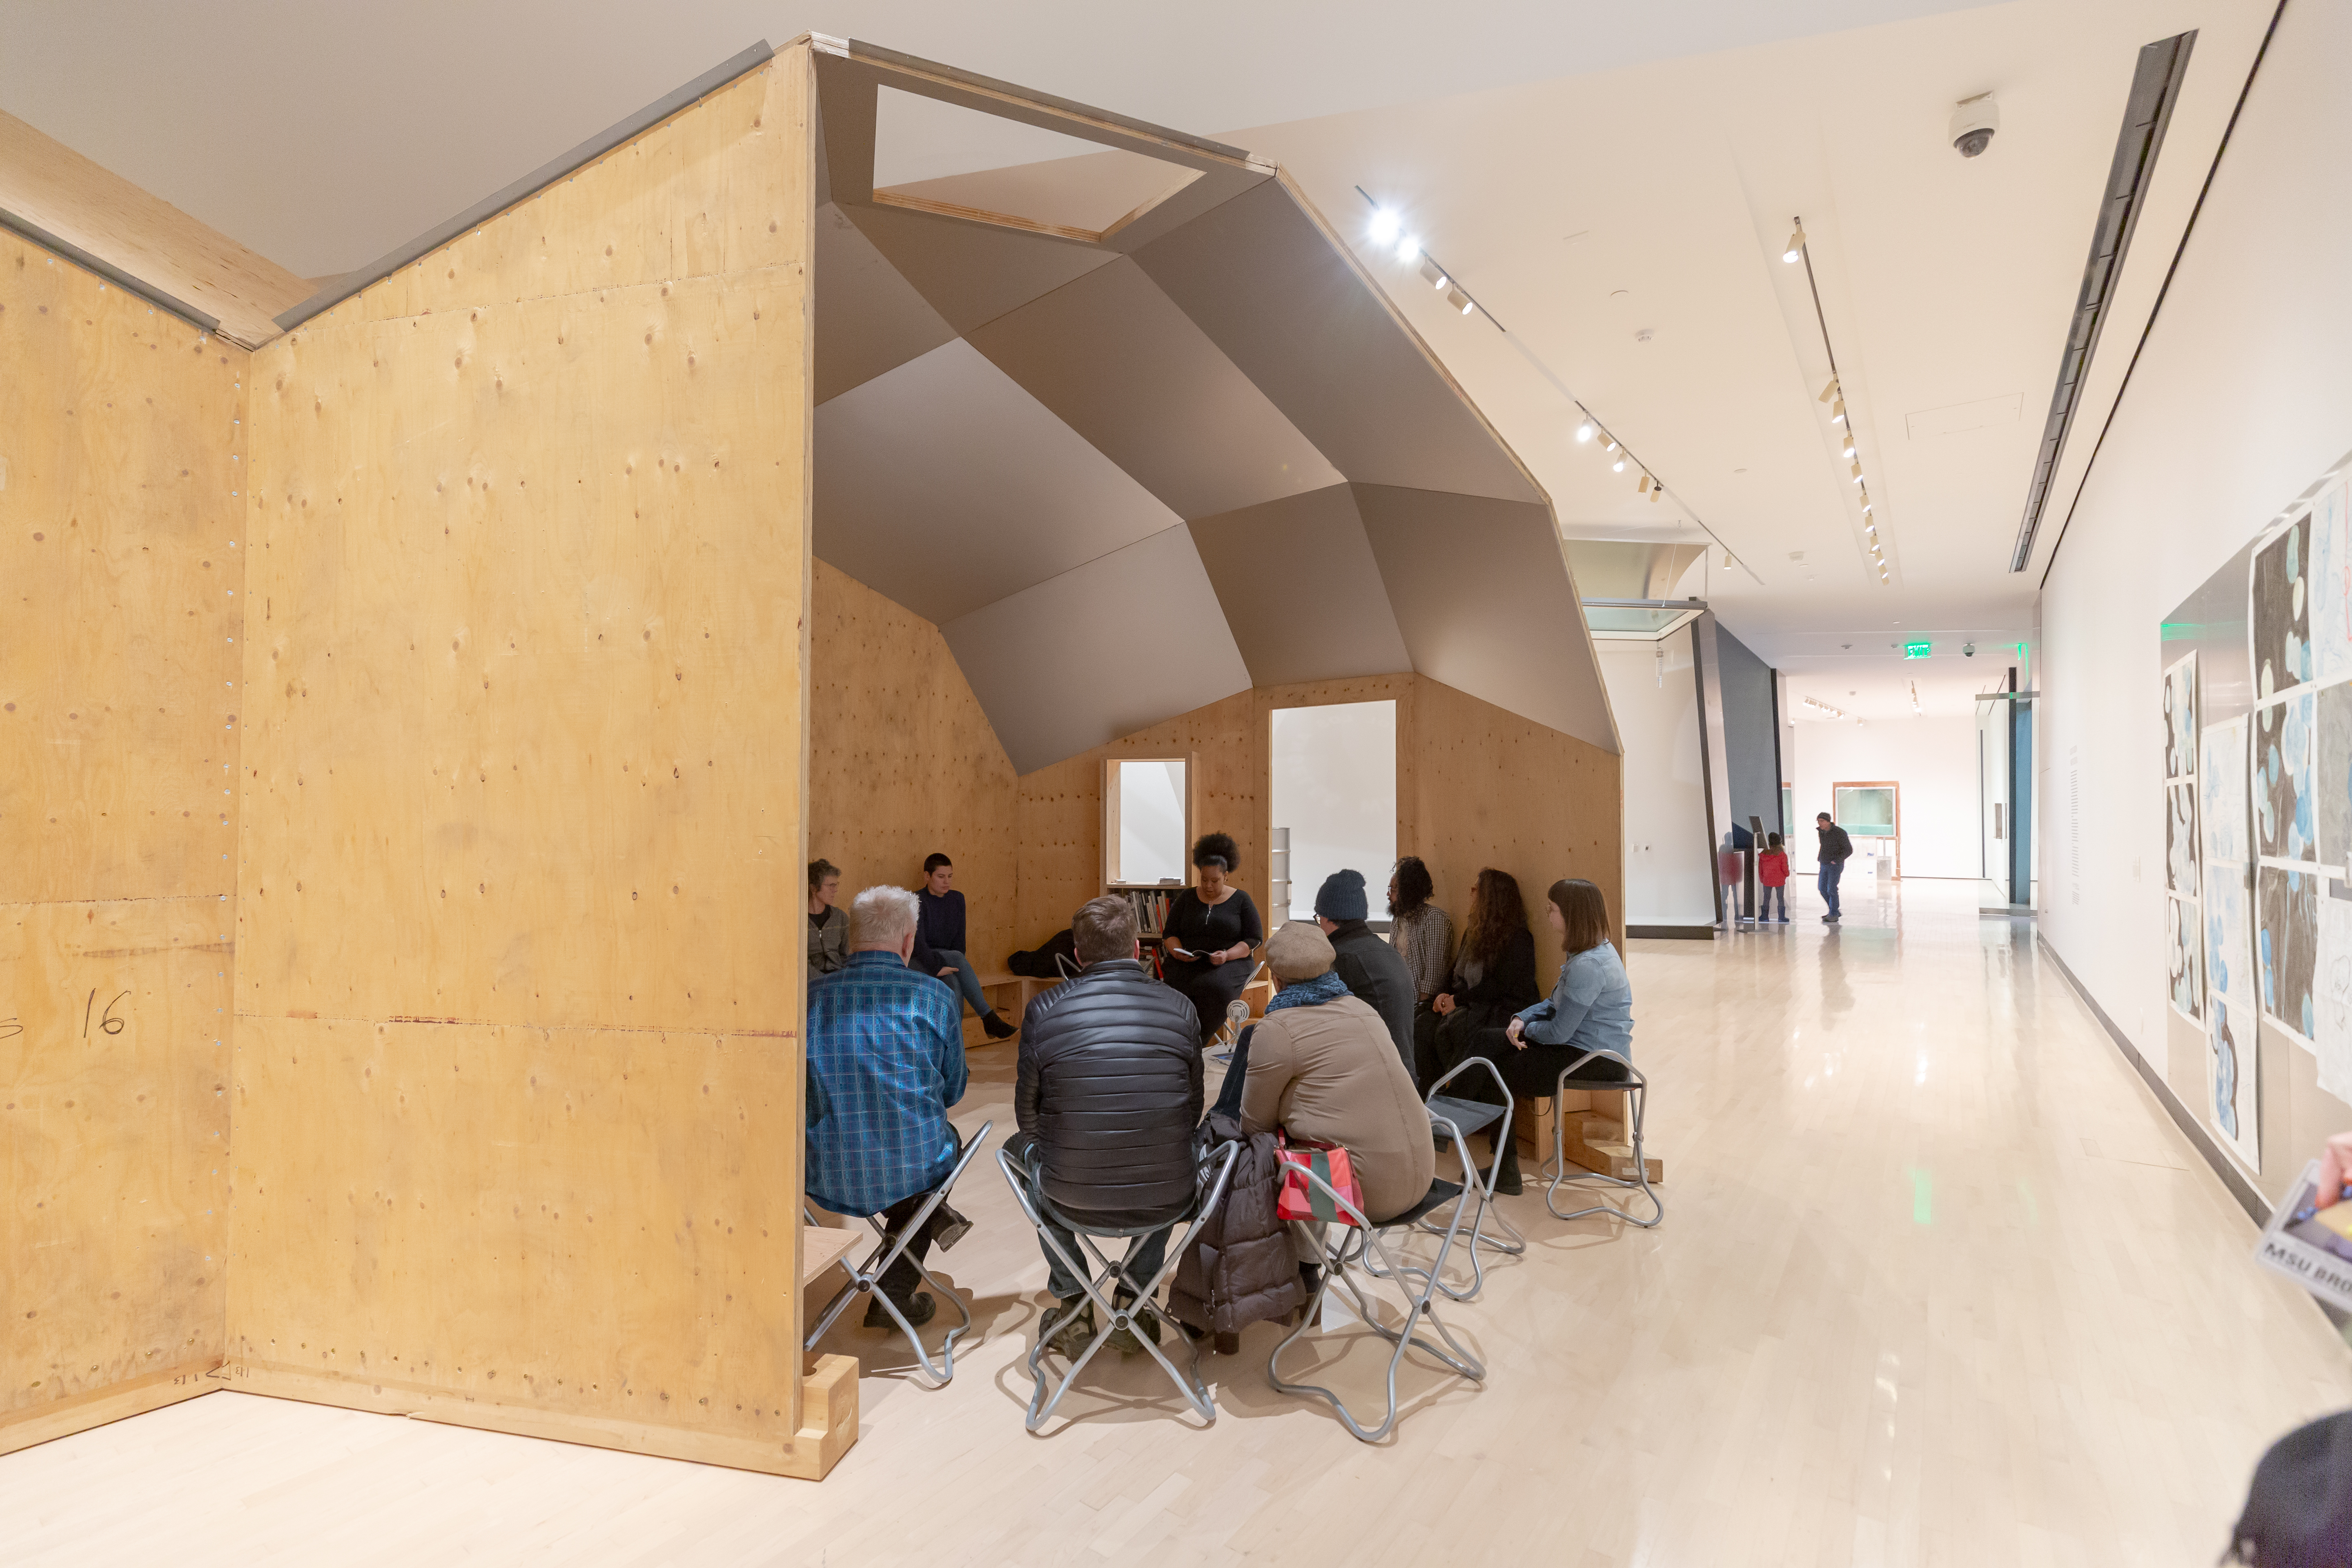 <i>Oscar Tuazon: Water School</i>, installation view at the Eli and Edythe Broad Art Museum at Michigan State University, 2019. Photo: Aaron Word/MSU Broad